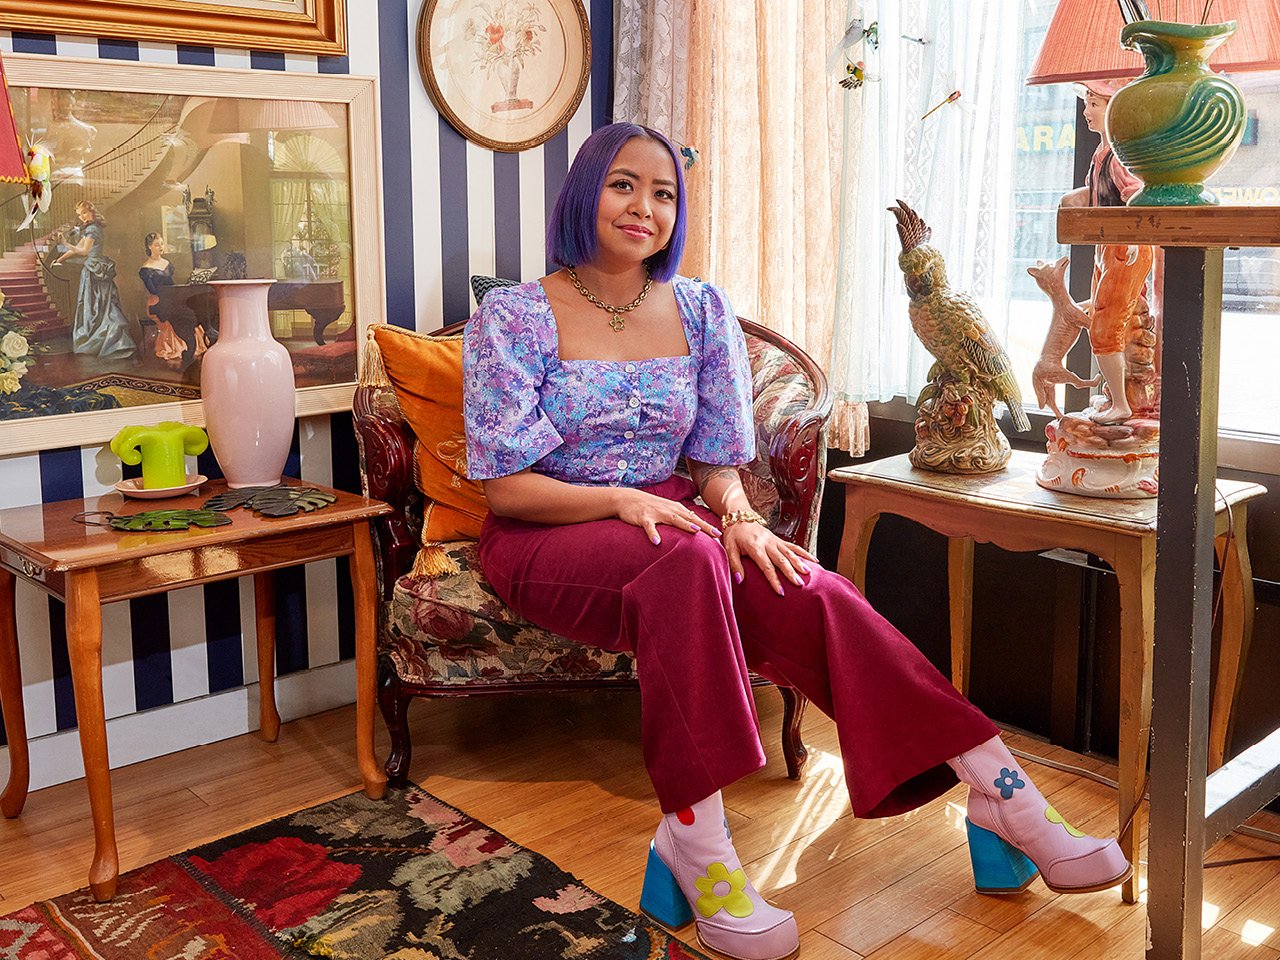 Survivor winner Erika Casupanan poses wearing a short-sleeved purple blouse and red pants, in an armchair against a navy and white striped wall